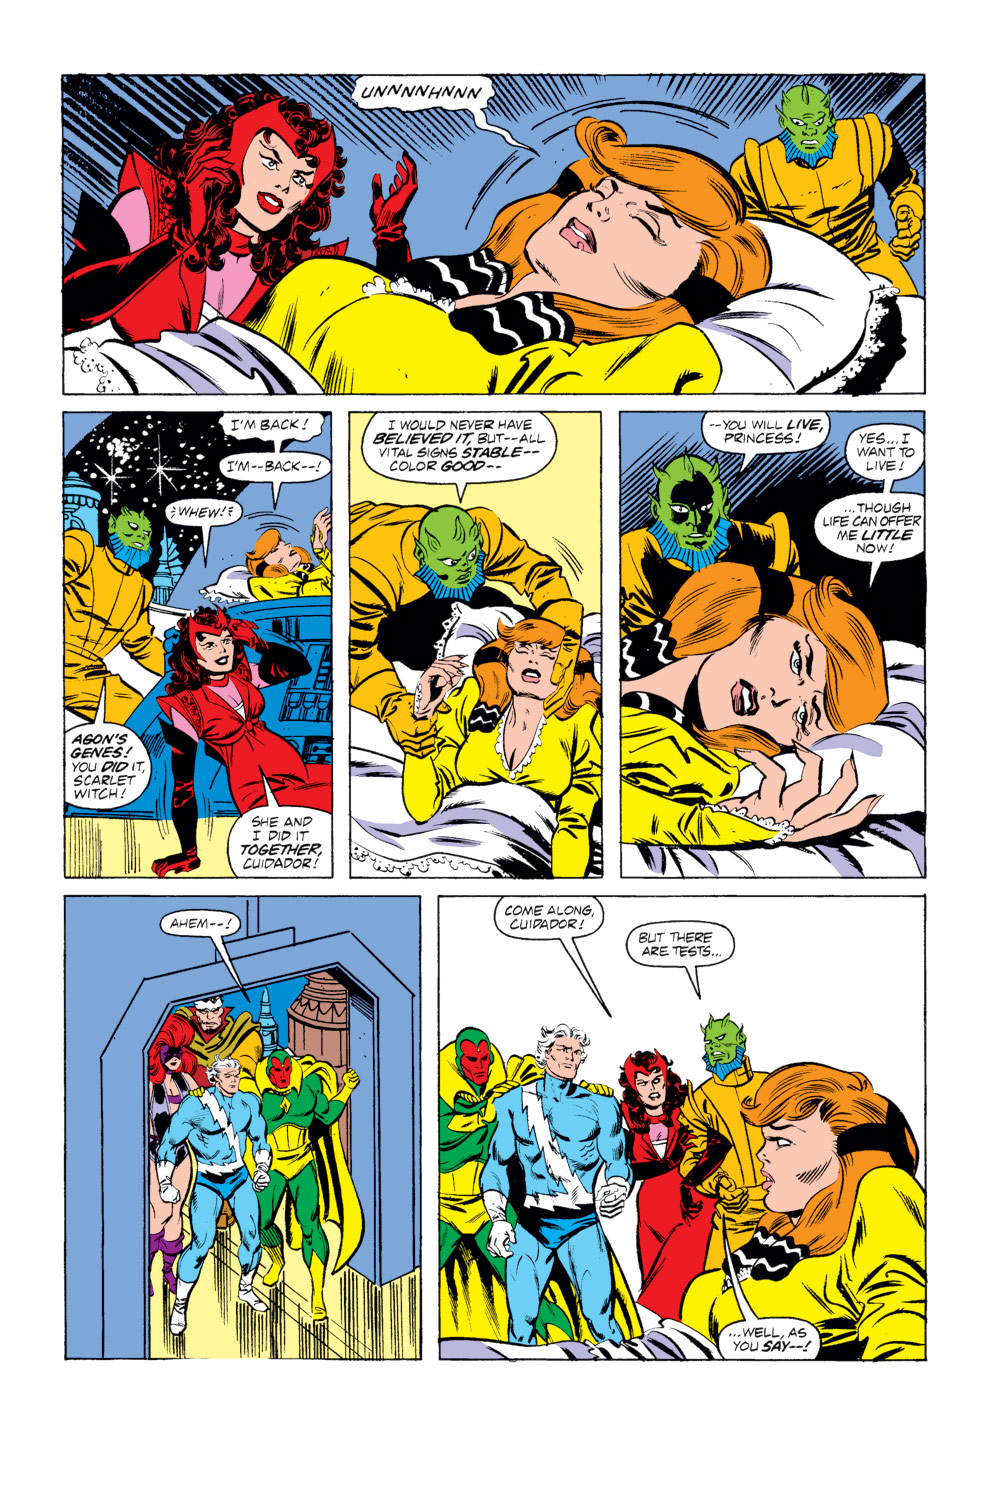 Read online The Vision and the Scarlet Witch (1985) comic - Issue #10